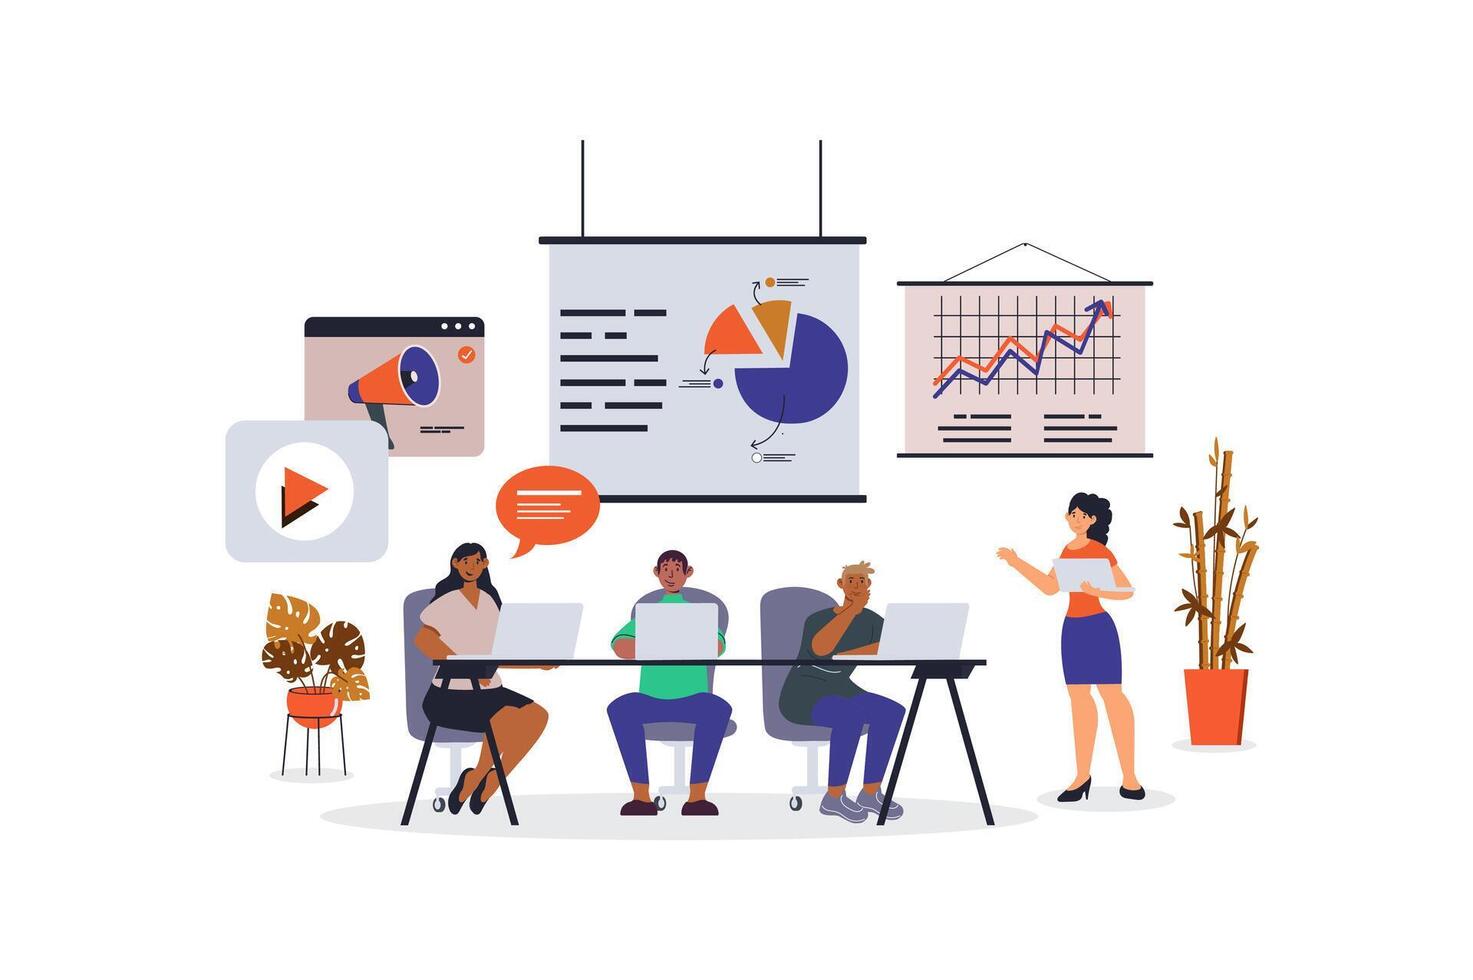 Marketing research concept with character scene for web. Women and men analysing market trends and data to launch product. People situation in flat design. Vector illustration for marketing material.